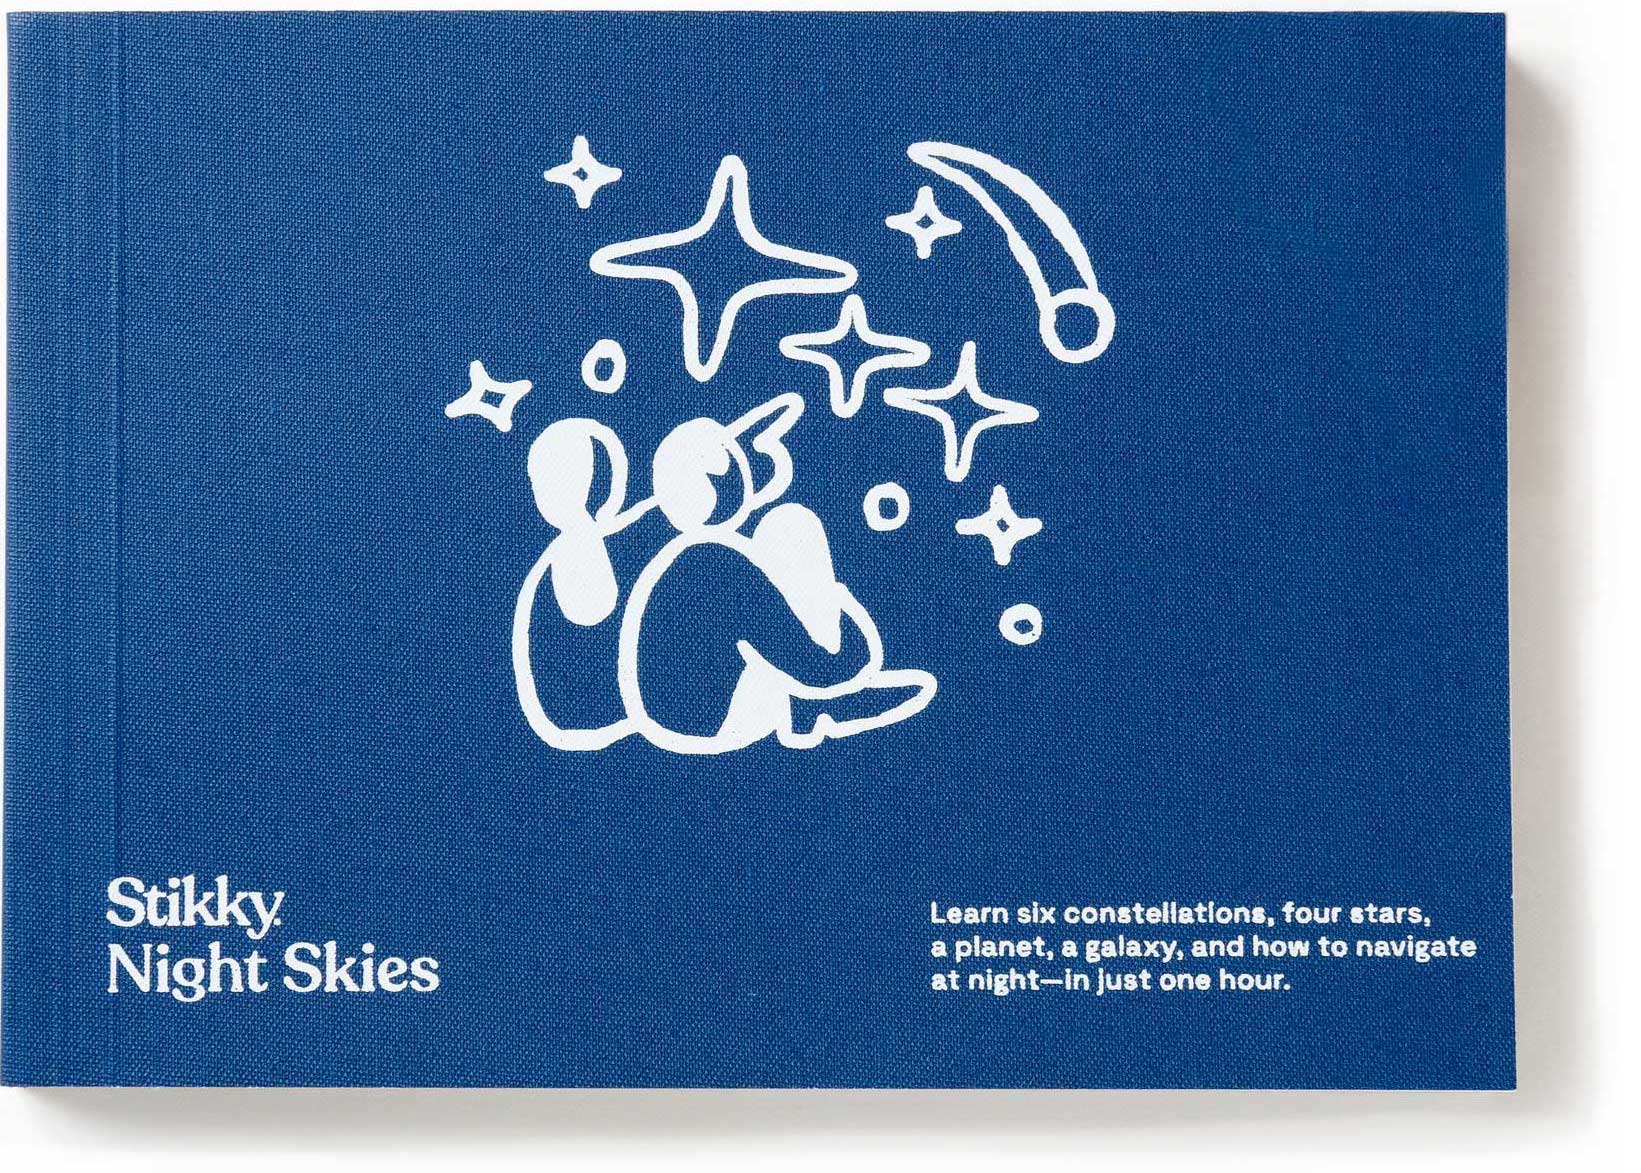 Stikky Night Skies cover. Learn six constellations, four stars a plant, a galaxy, and how to navigate at night-in just one hour